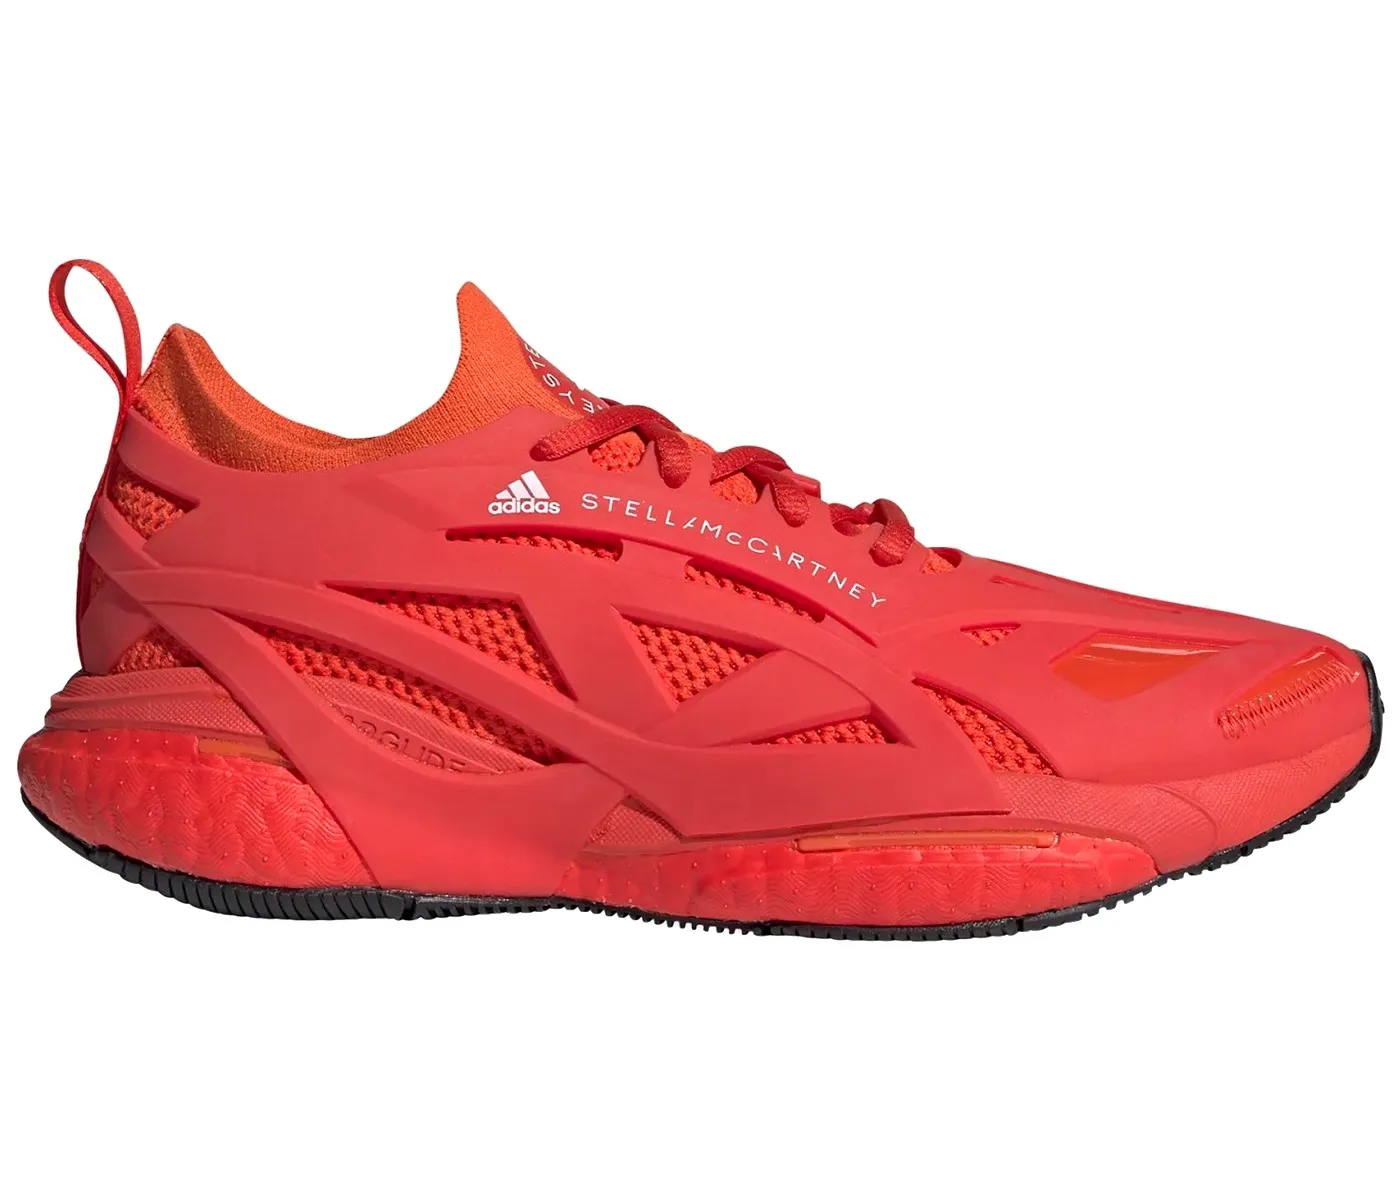 adidas SolarGlide Stella McCartney Active Red 